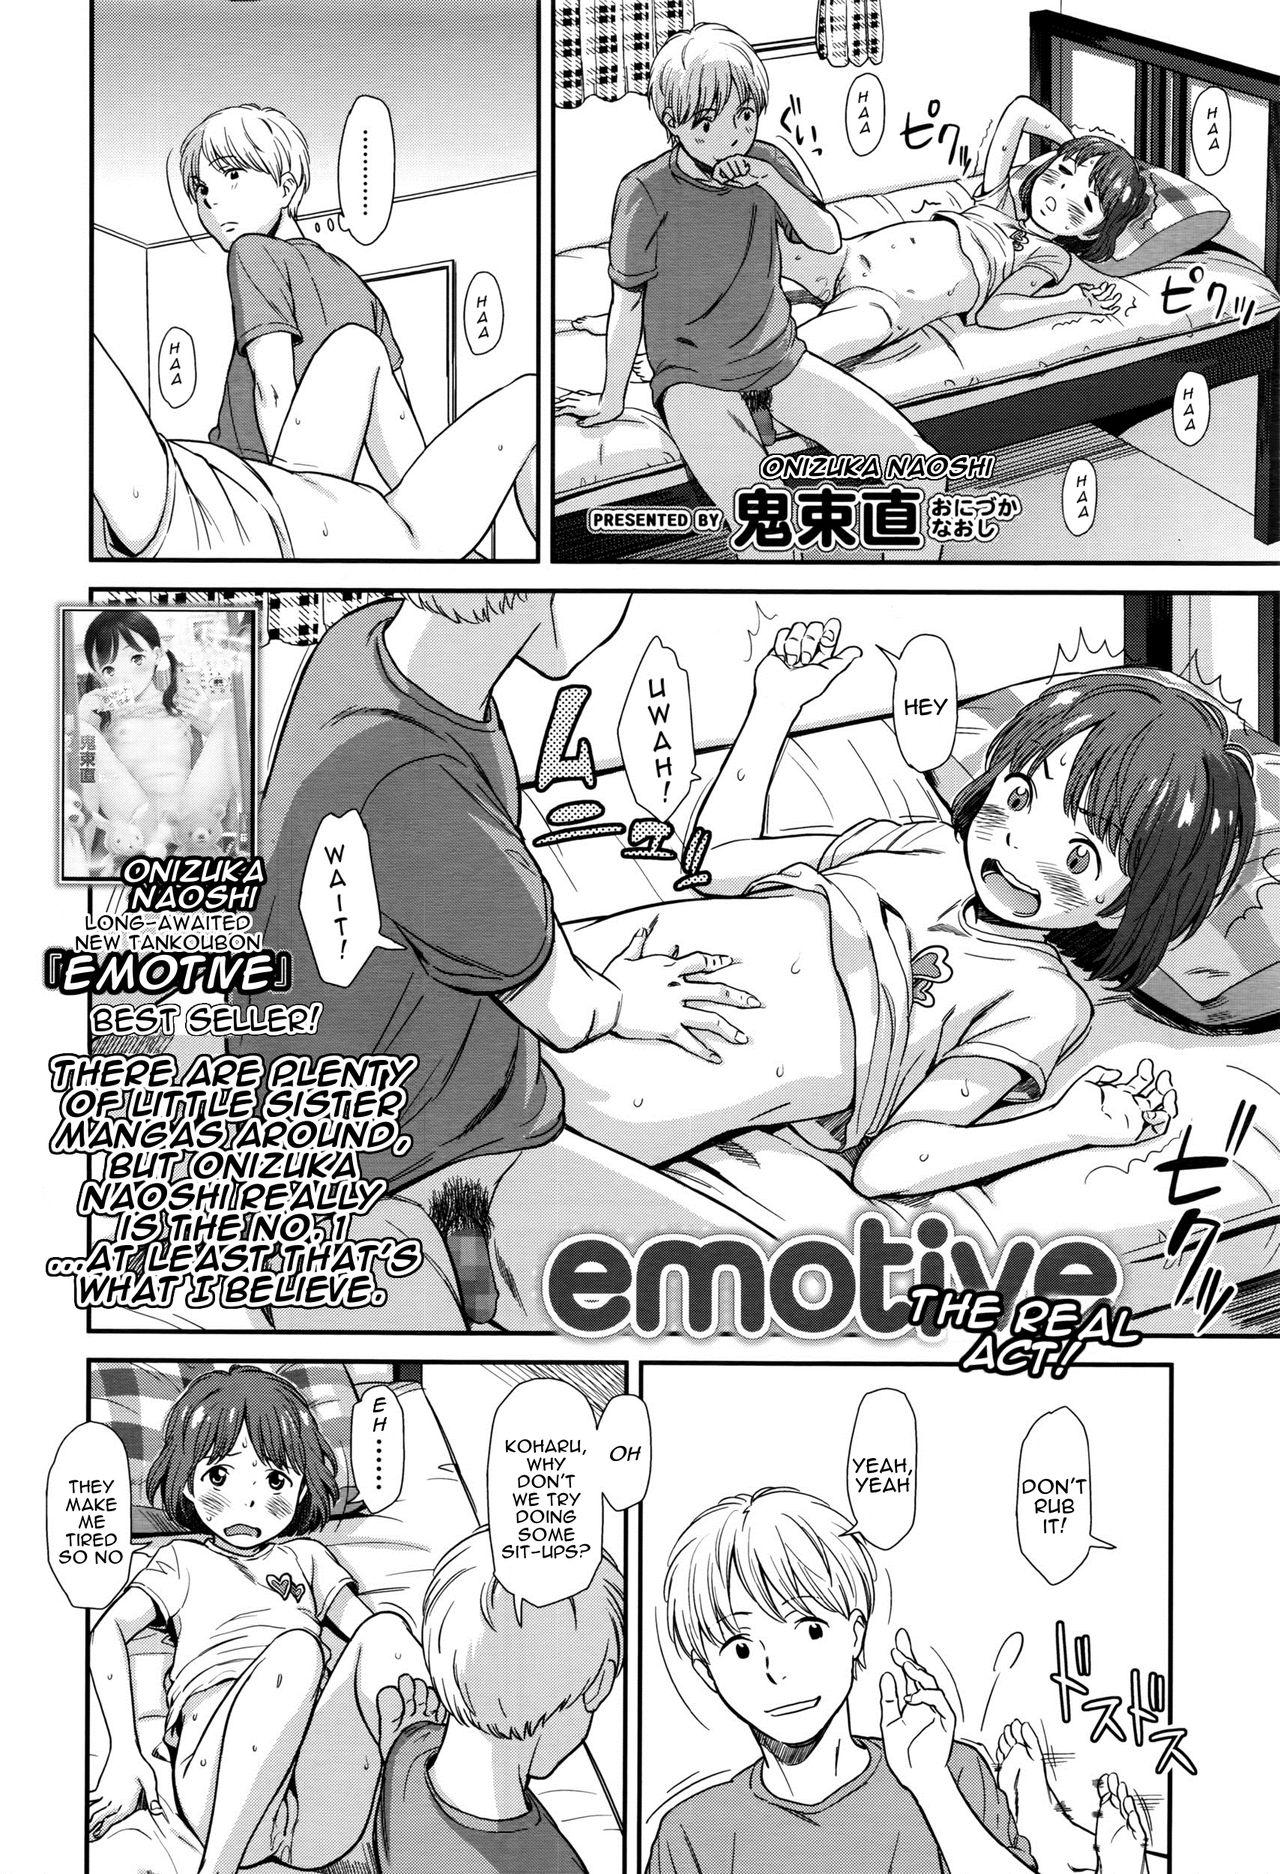 Sex Toys emotive Honban! | emotive The Real Act! Ghetto - Page 2